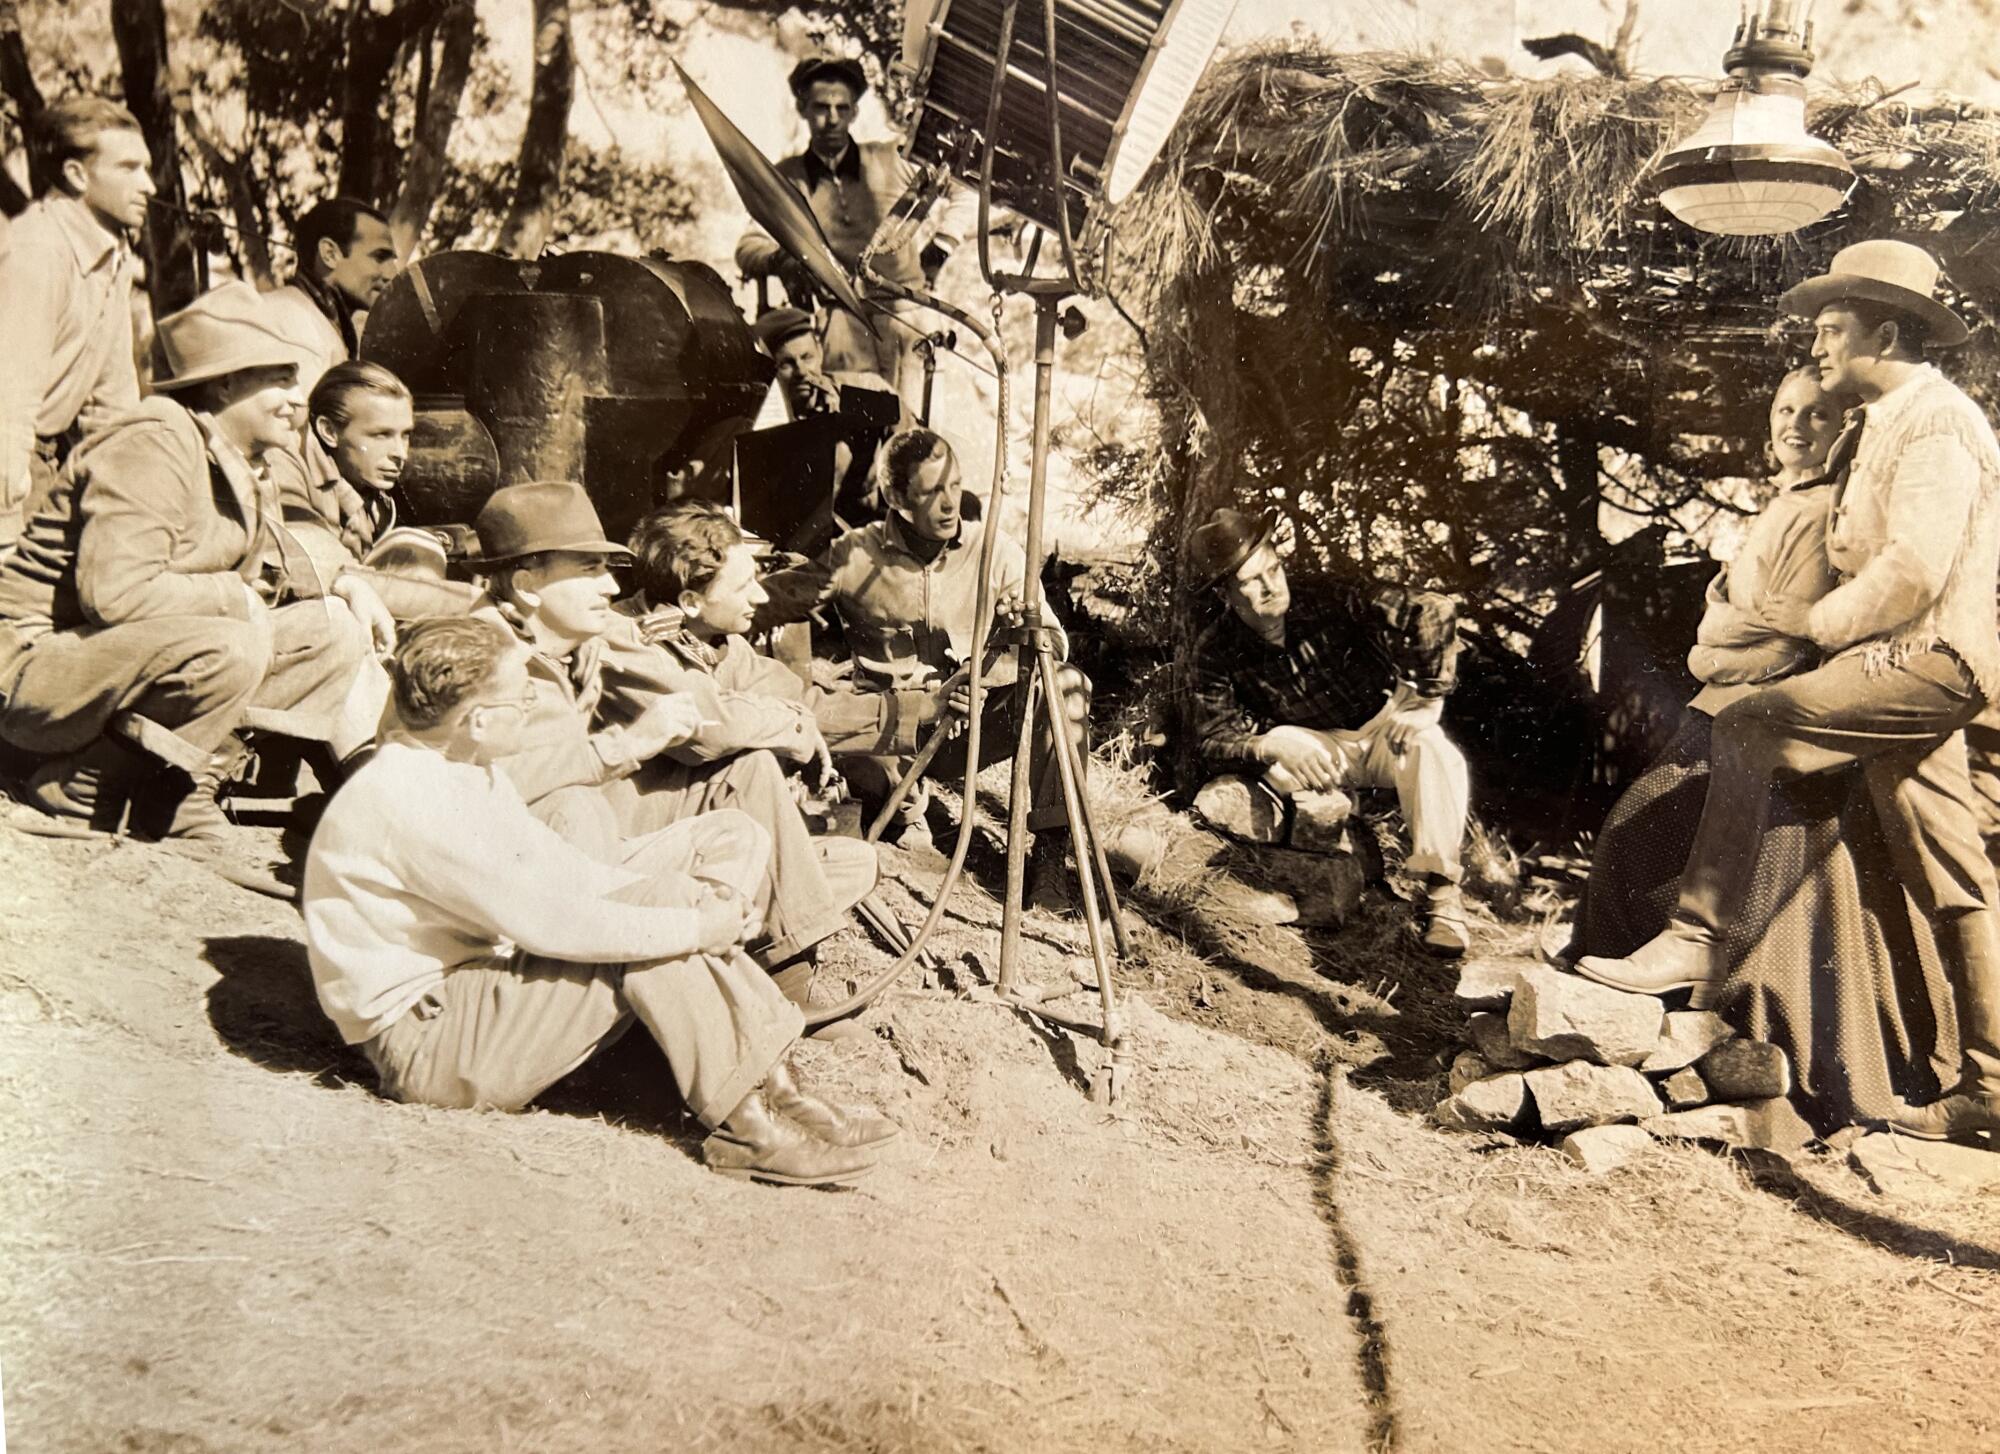 People sit on the ground in a vintage photo from a movie set